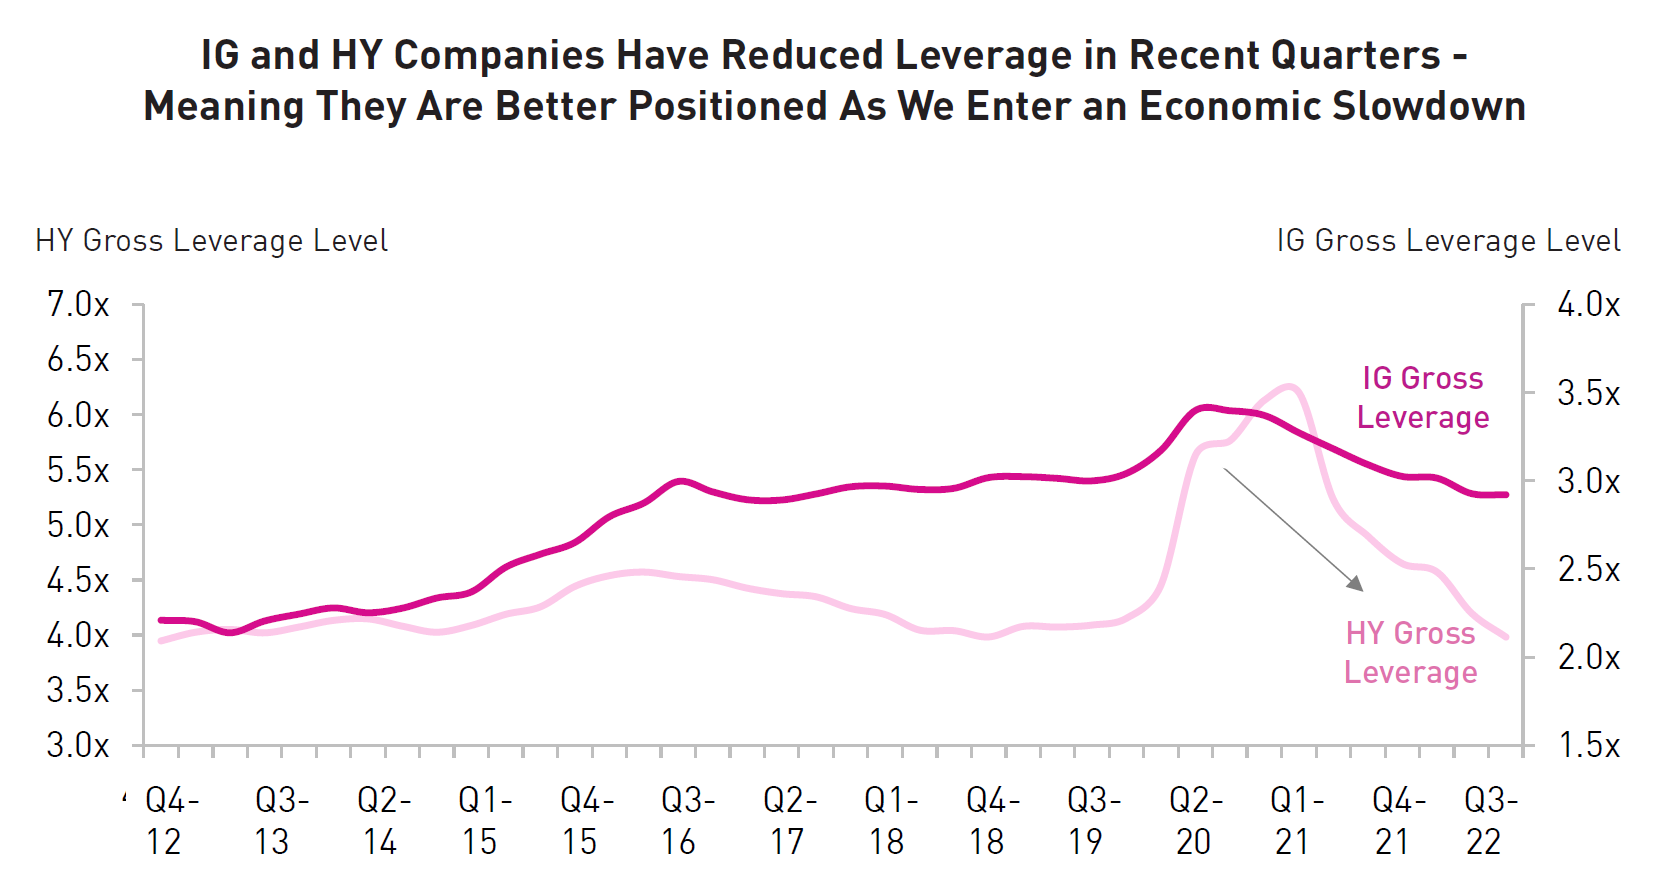 IG and HY Companies Have Reduced Leverage in Recent Quarters - Meaning They Are Better Positioned As We Enter an Economic Slowdown